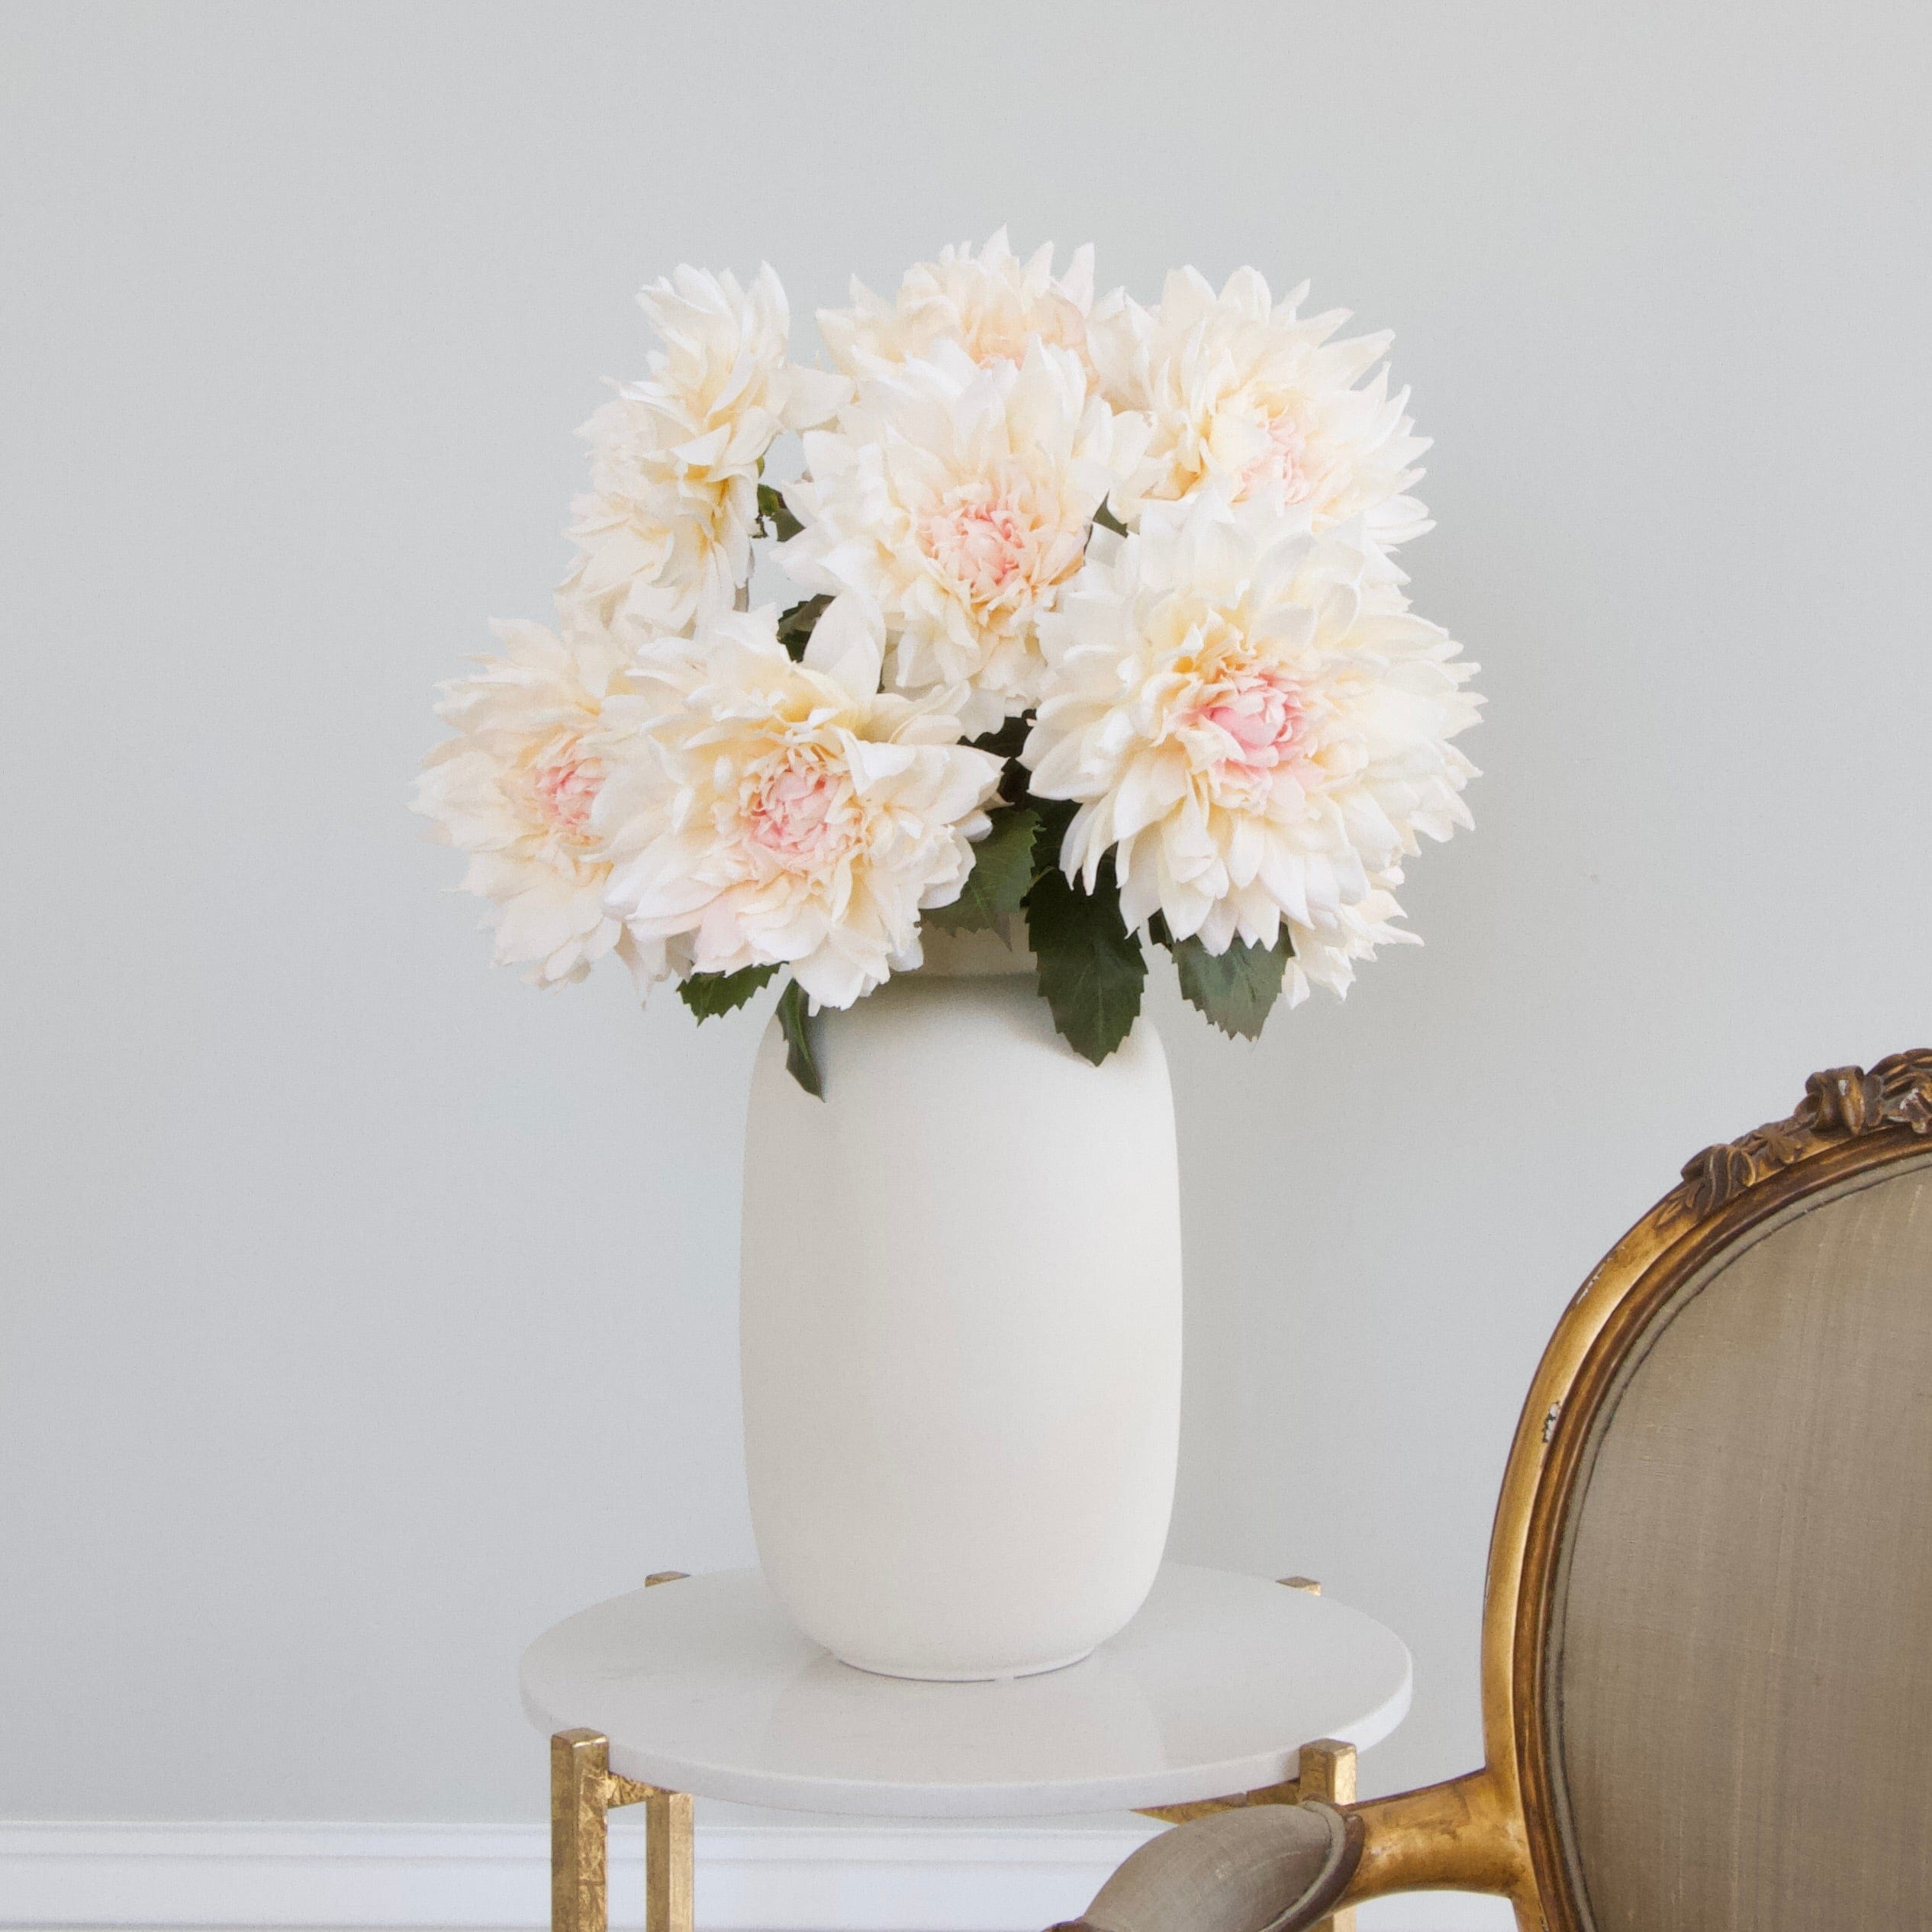 Luxury Lifelike Realistic Artificial Fabric Silk Blooms with Foliage Buy Online from The Faux Flower Company | 12 stems of Pale Pink Cafe Au Lait Dahlia ABY2216 styled in Ceramic Matte White Kingham Vase ABP04B3